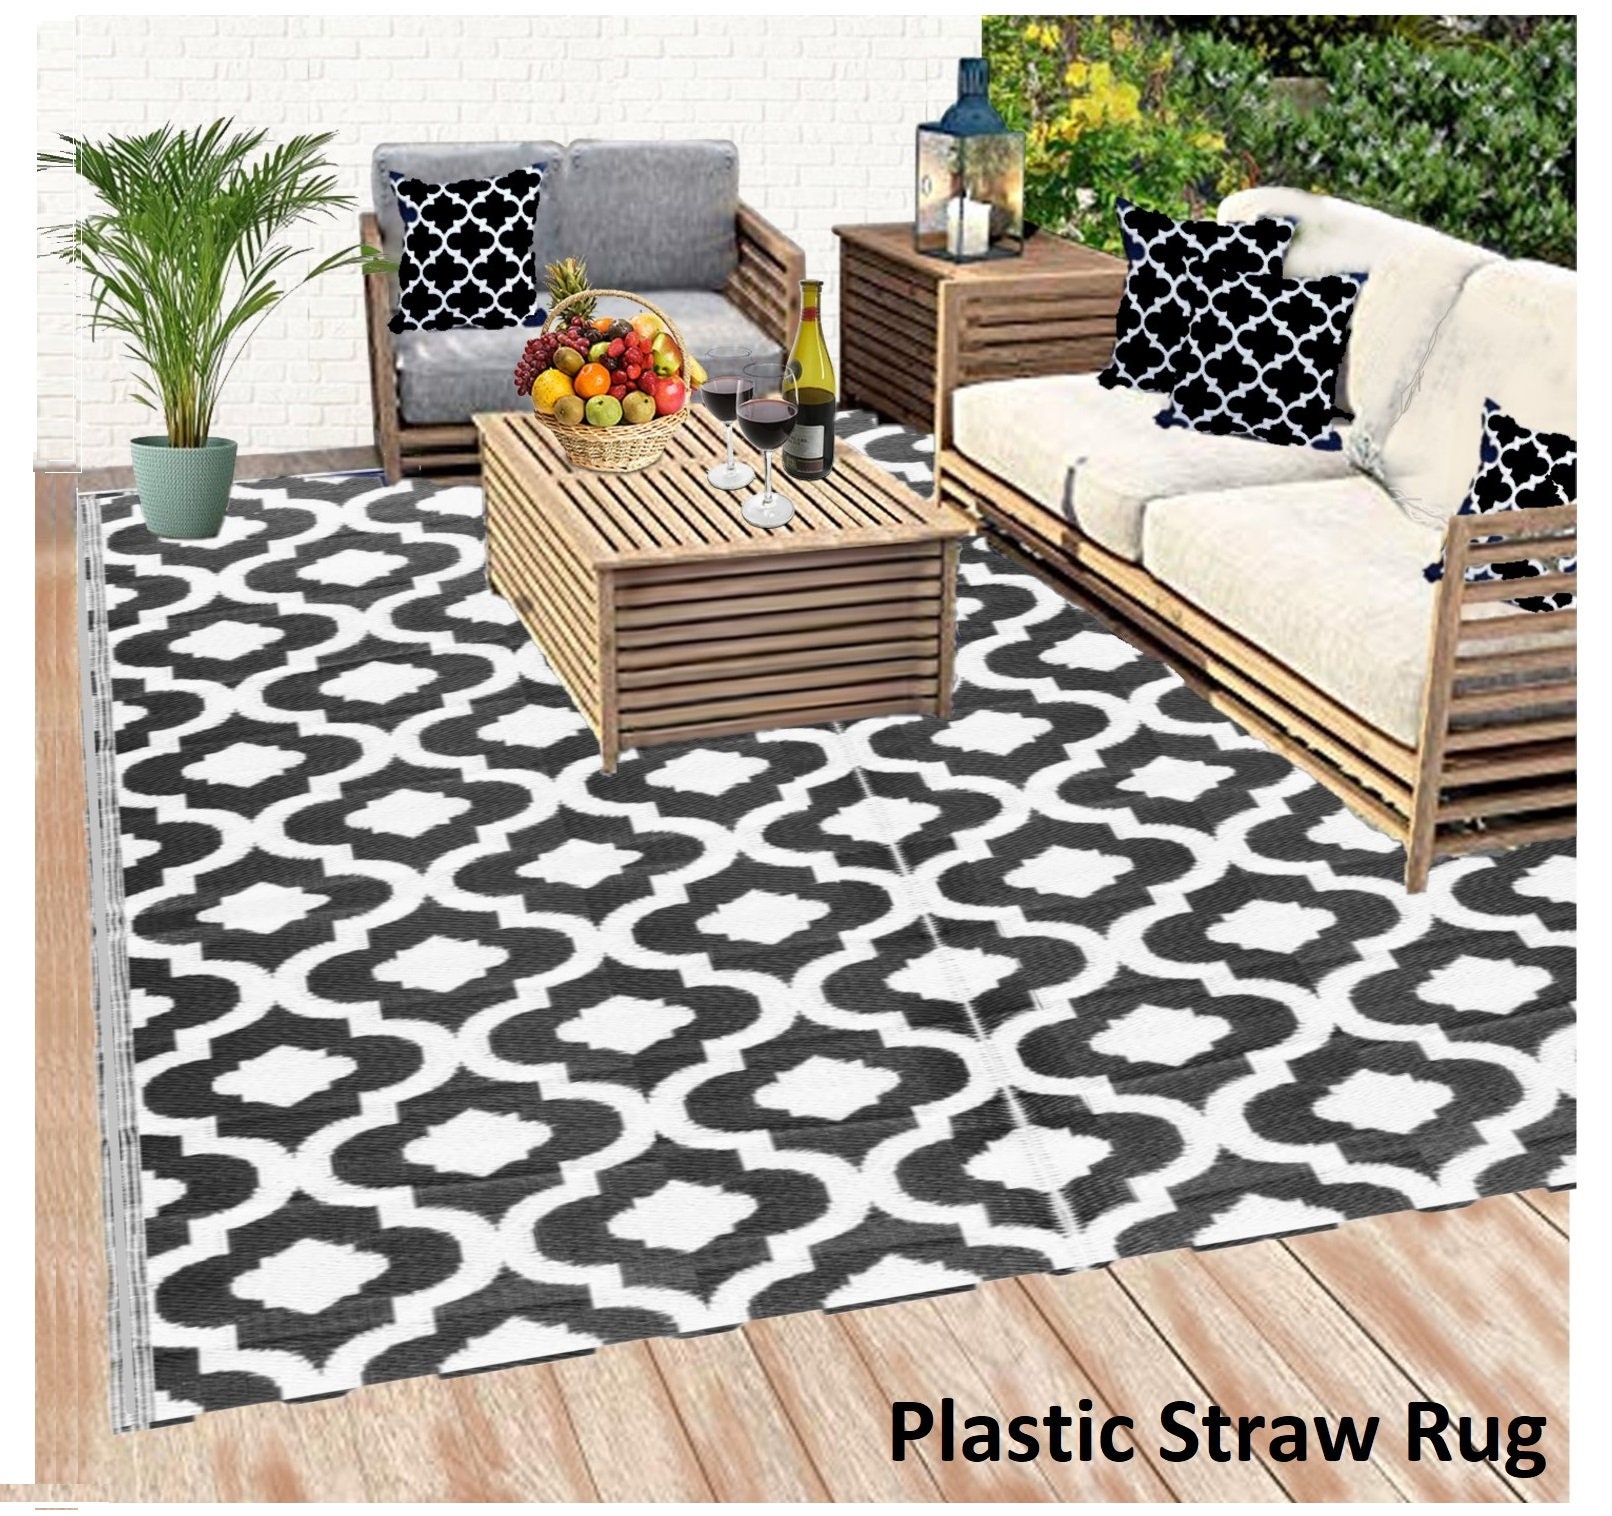  Reversible Mats - Outdoor Rugs 9'x12' for Patios Clearance,  Plastic Straw Rugs Waterproof, Portable, Large Floor Mat and Rugs for  Outdoor RV, Balcony, Picnic, Beach, Camping(Black & Cream White) : Patio